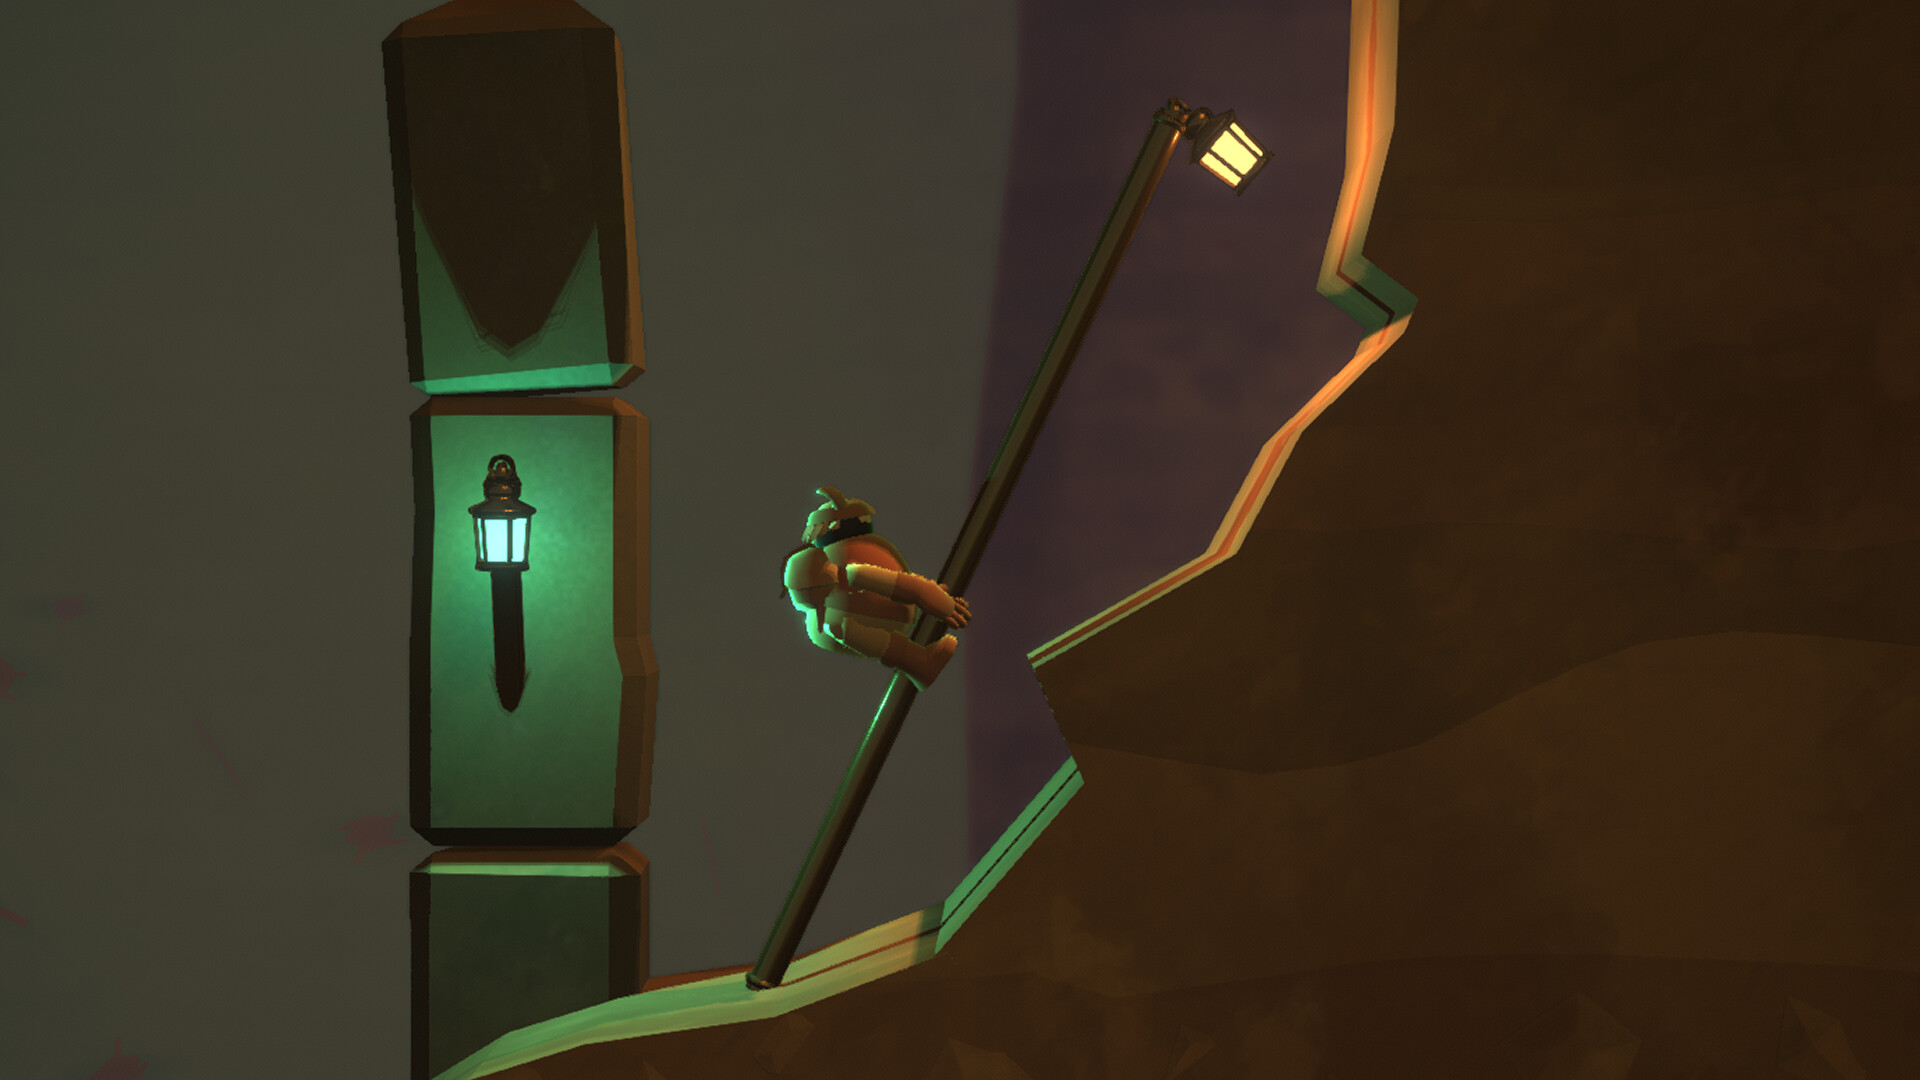 A difficult game about Climbing. Купить a difficult game about climbing